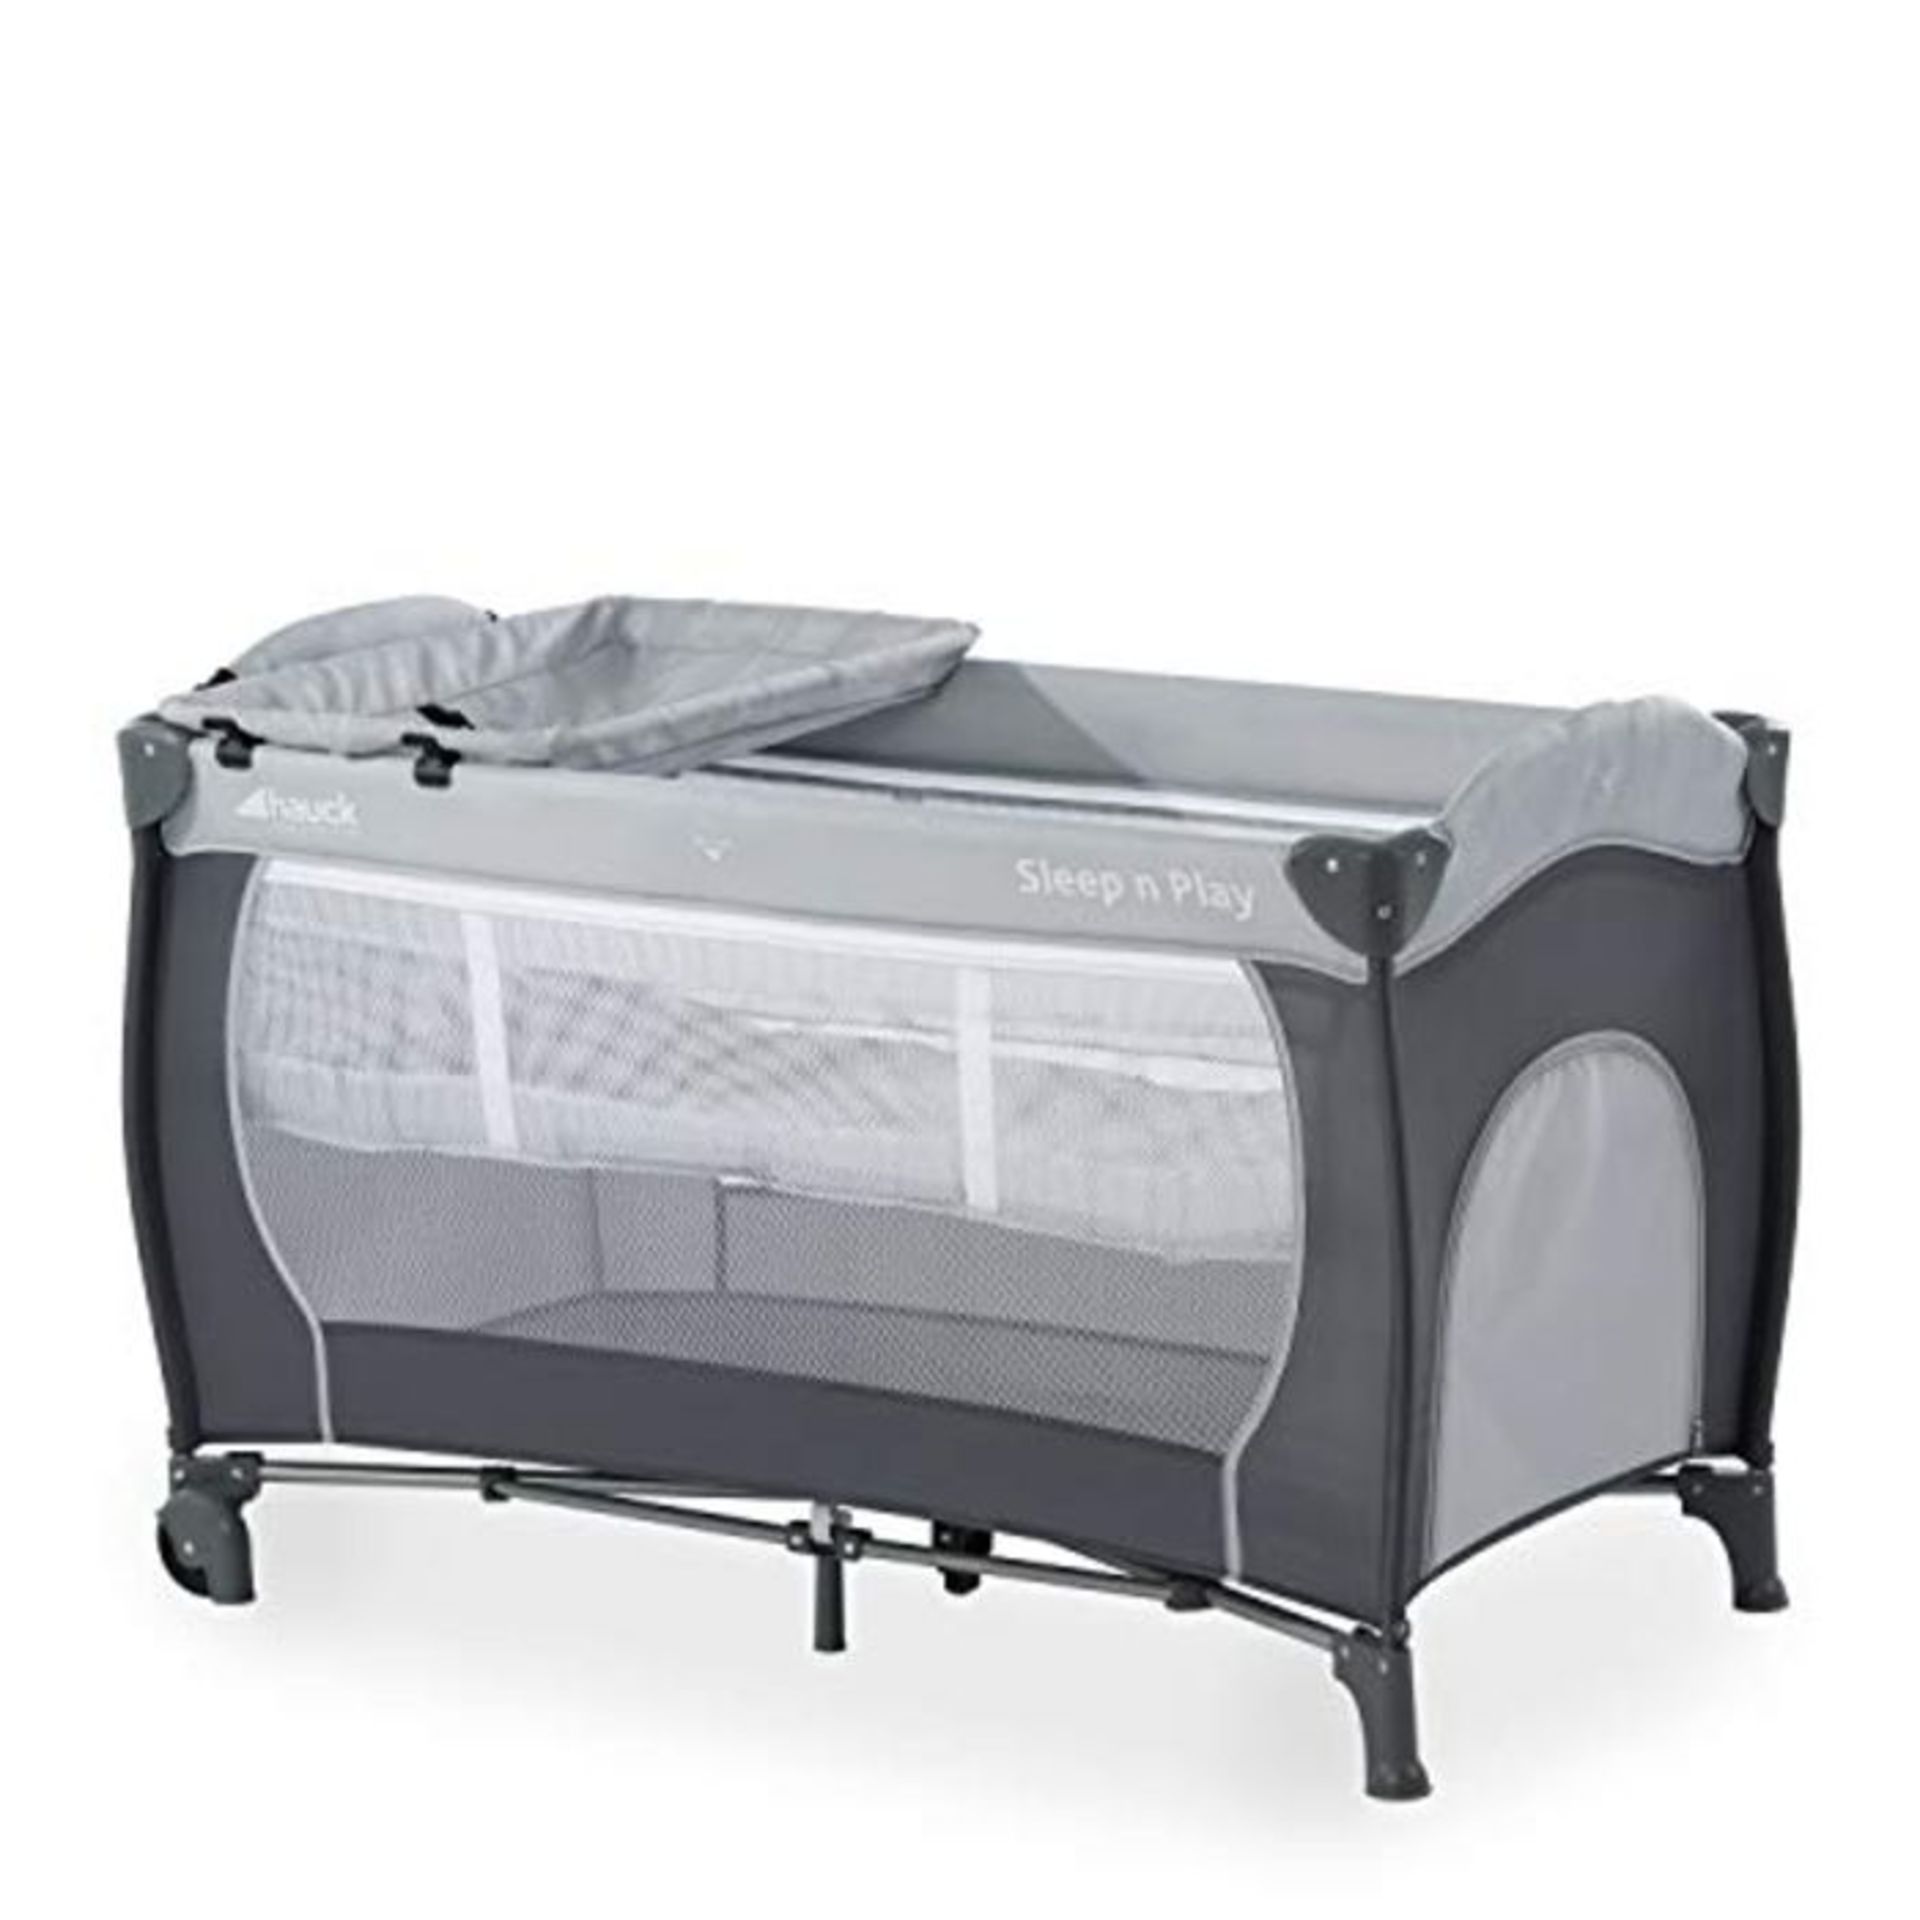 RRP £63.00 Hauck Travel Cot Set Sleep N Play Center / for Babys and Toddlers from Birth up to 15